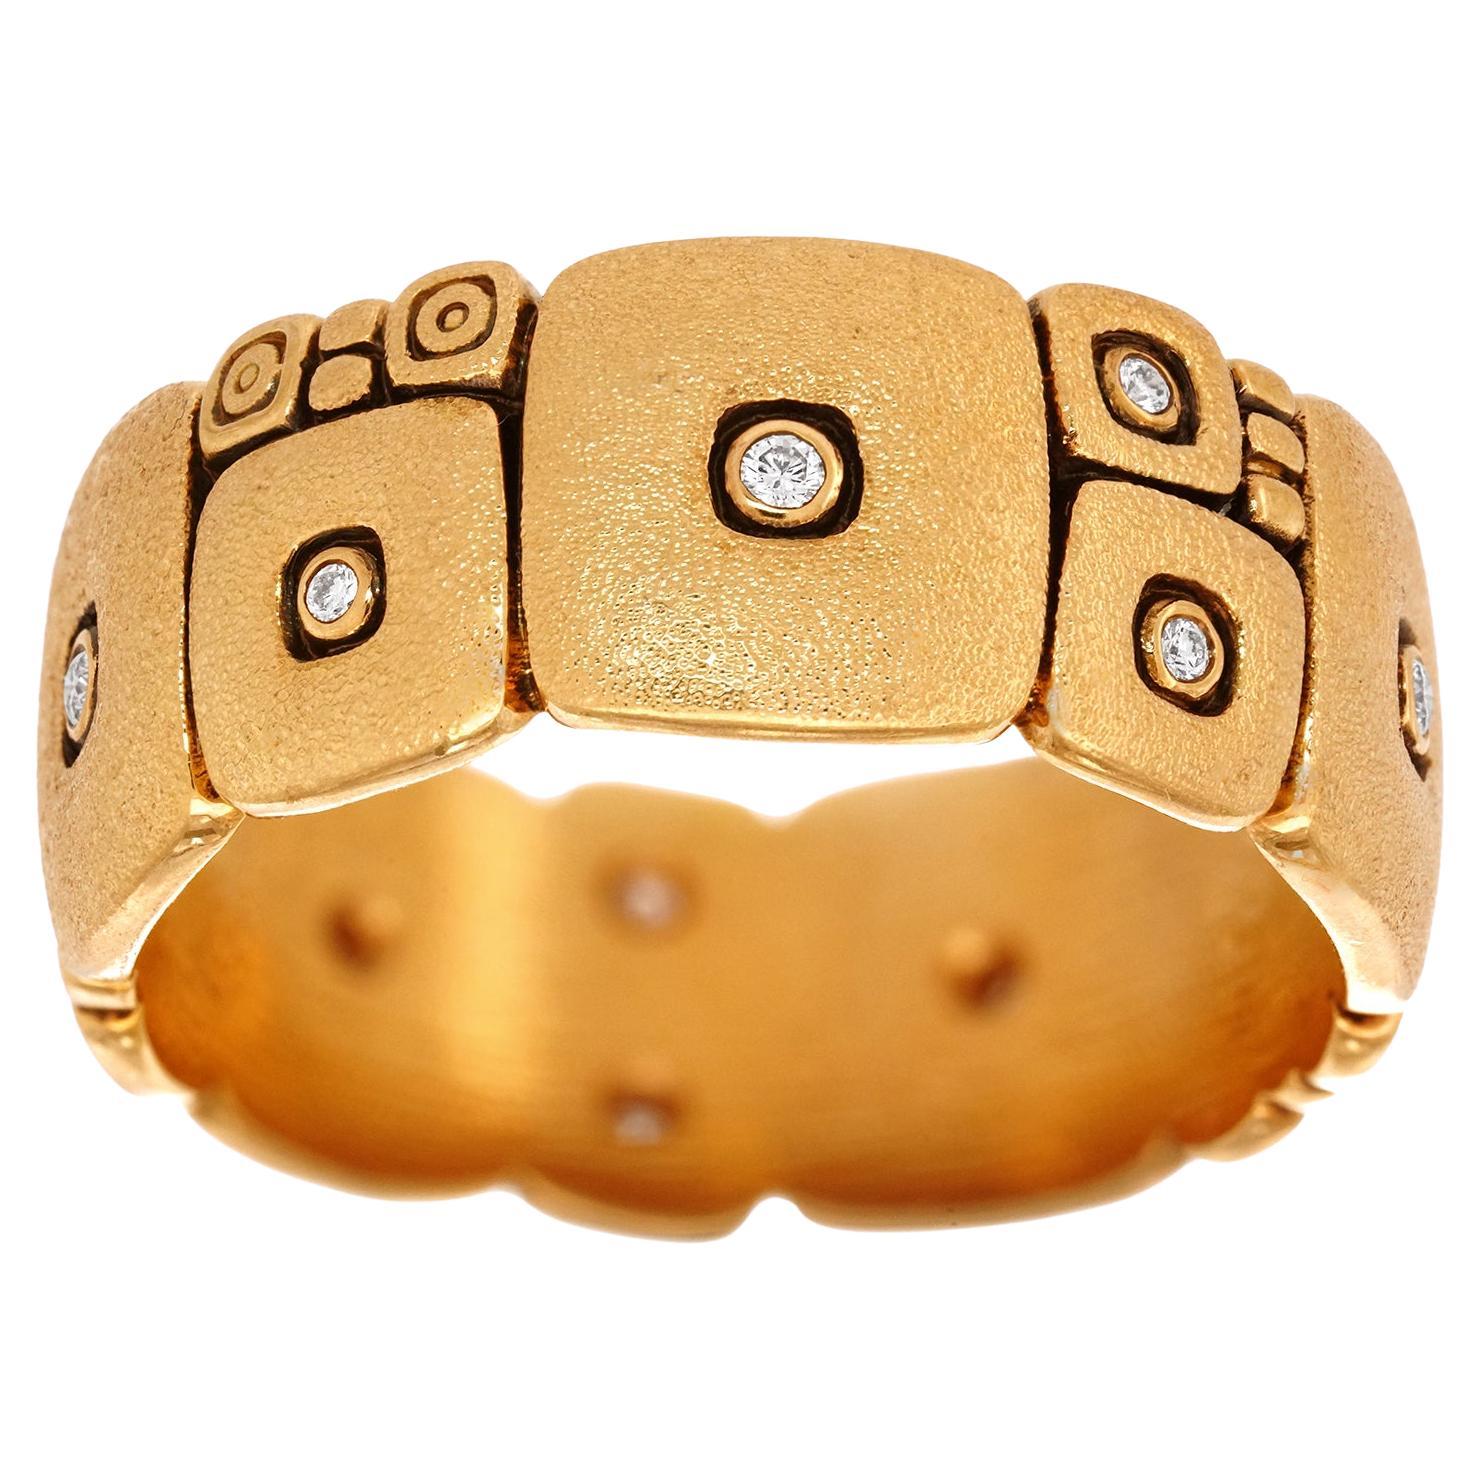 Refrain, Ring in recycled solid gold 18k / Emilie Bliguet Ethical Jewellery